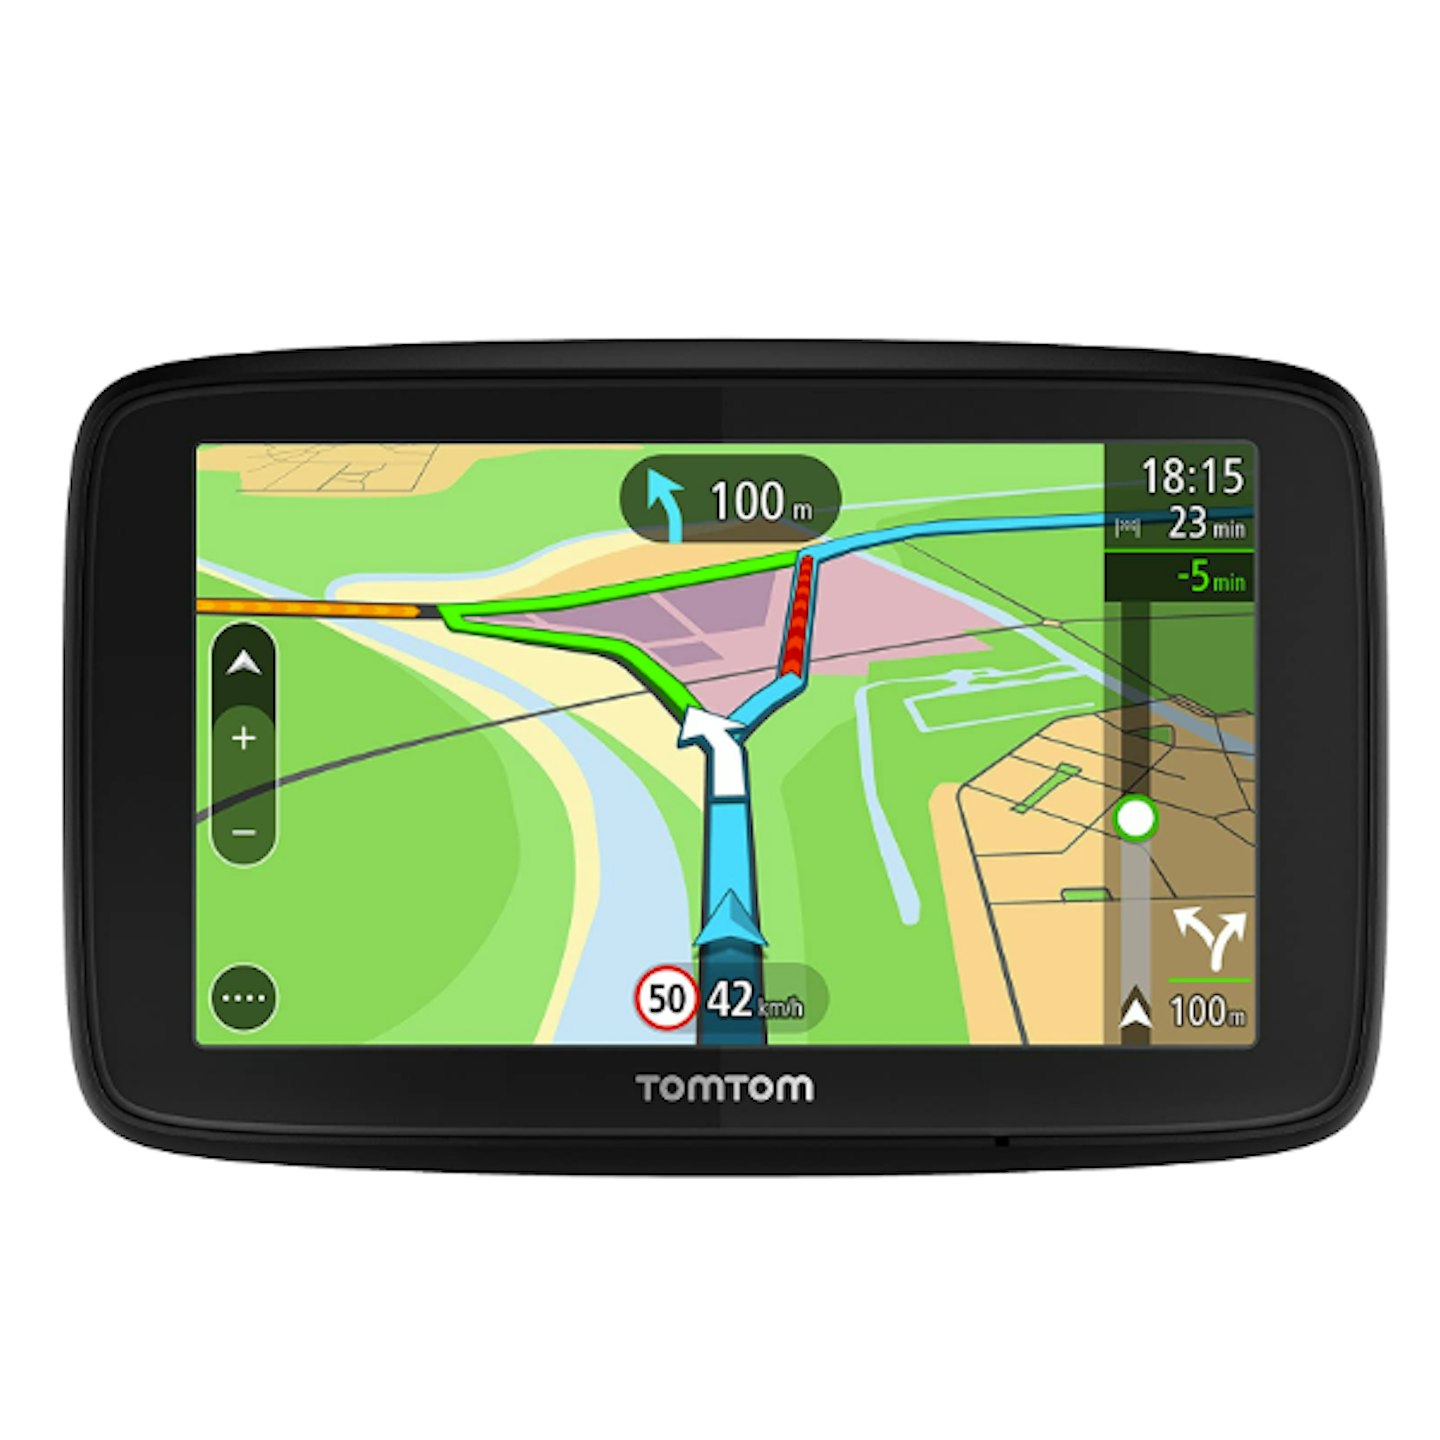 Up to 39% off selected TomTom products